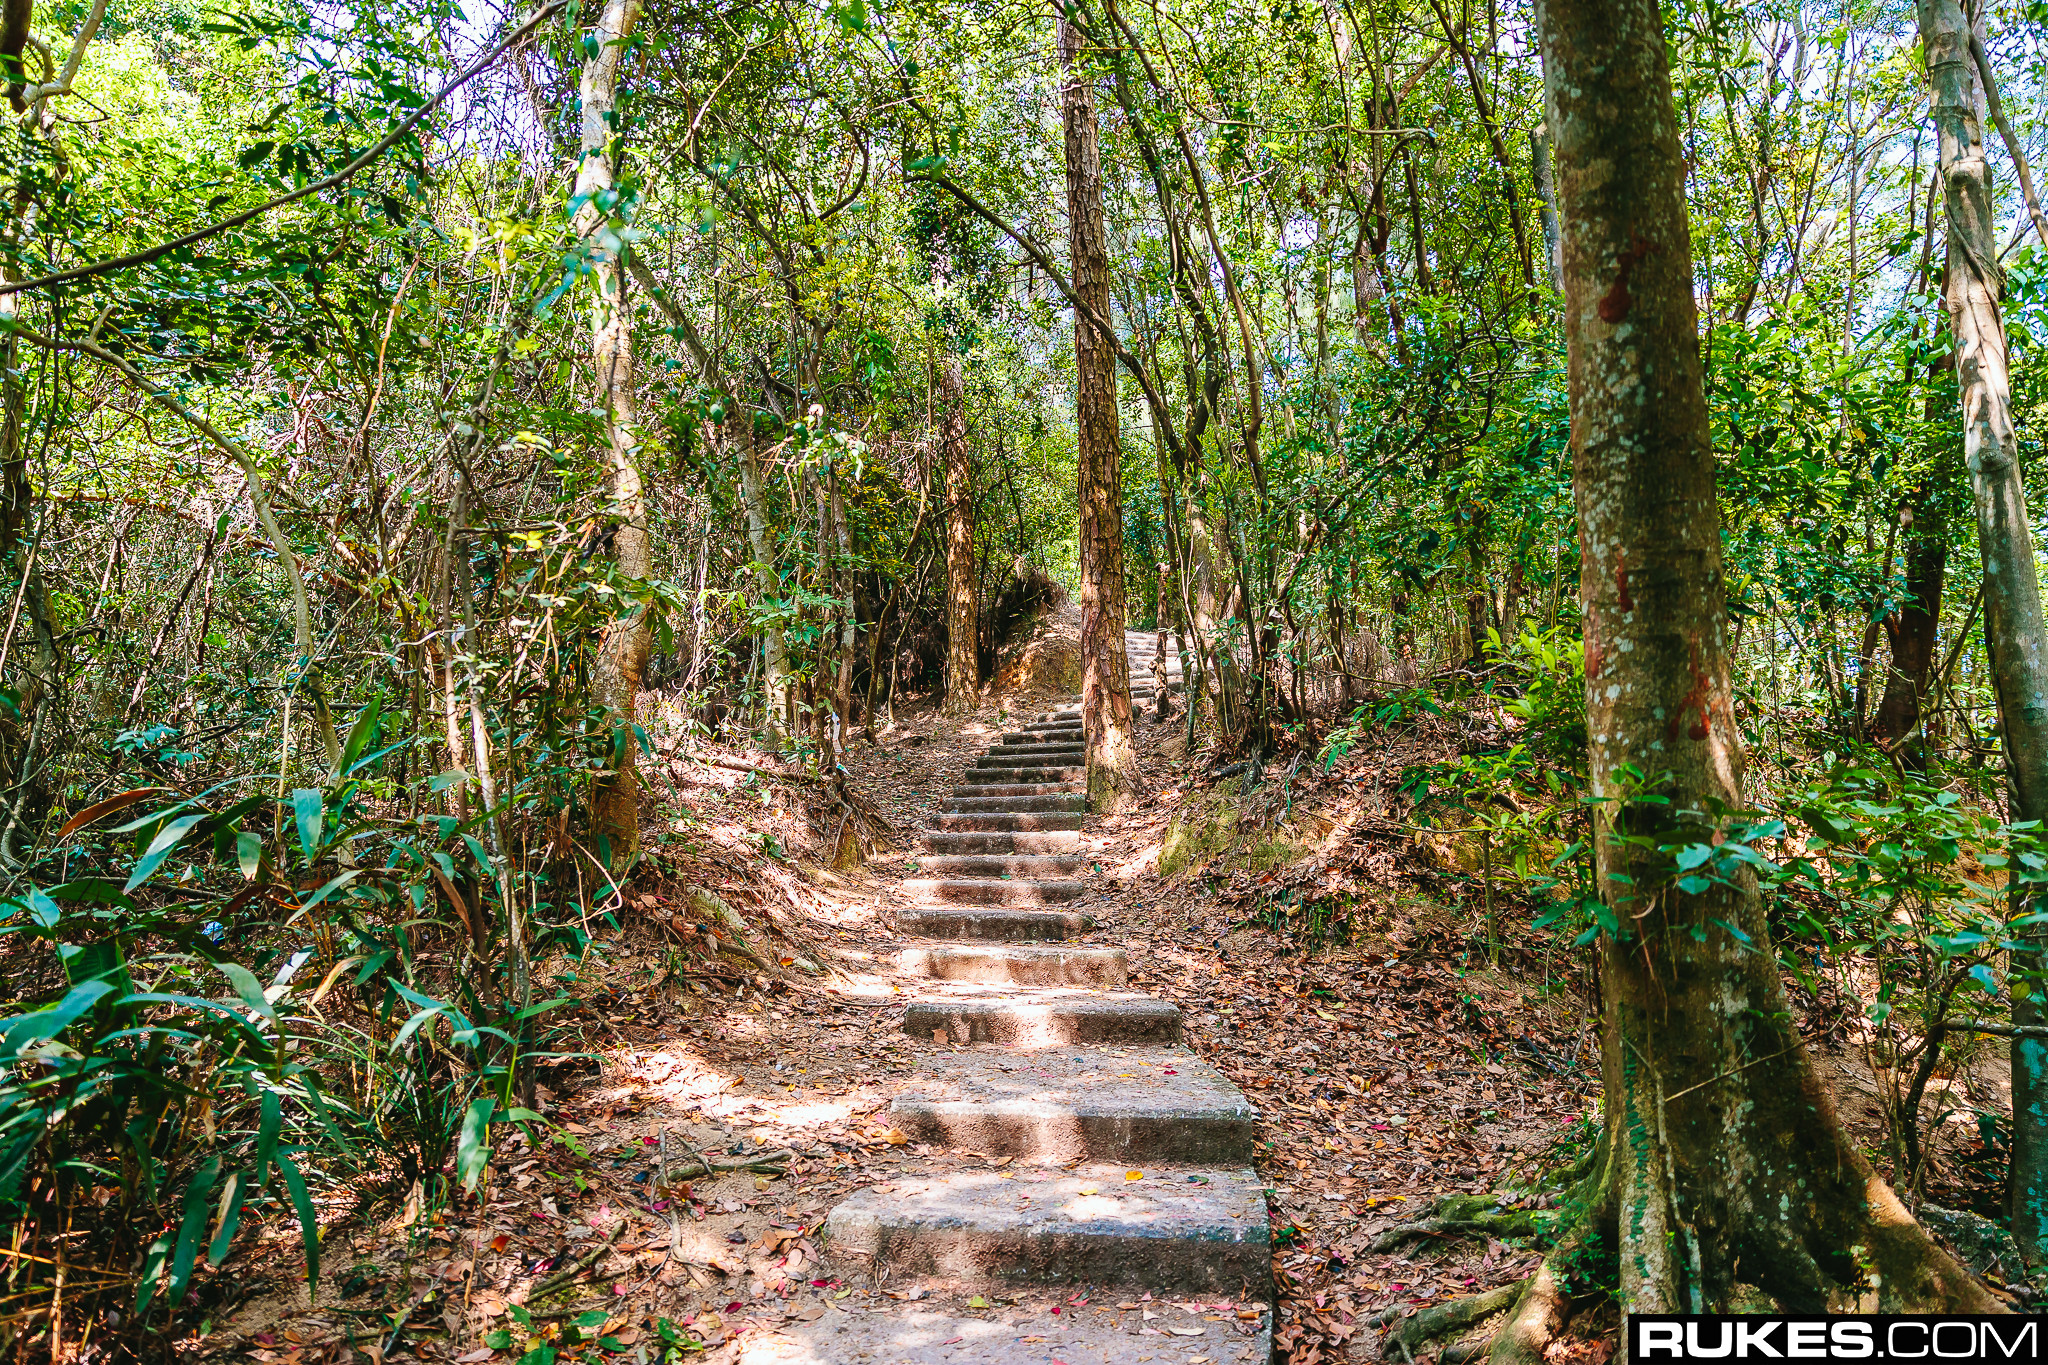 General 2048x1365 Rukes photography Hong Kong forest path stairs